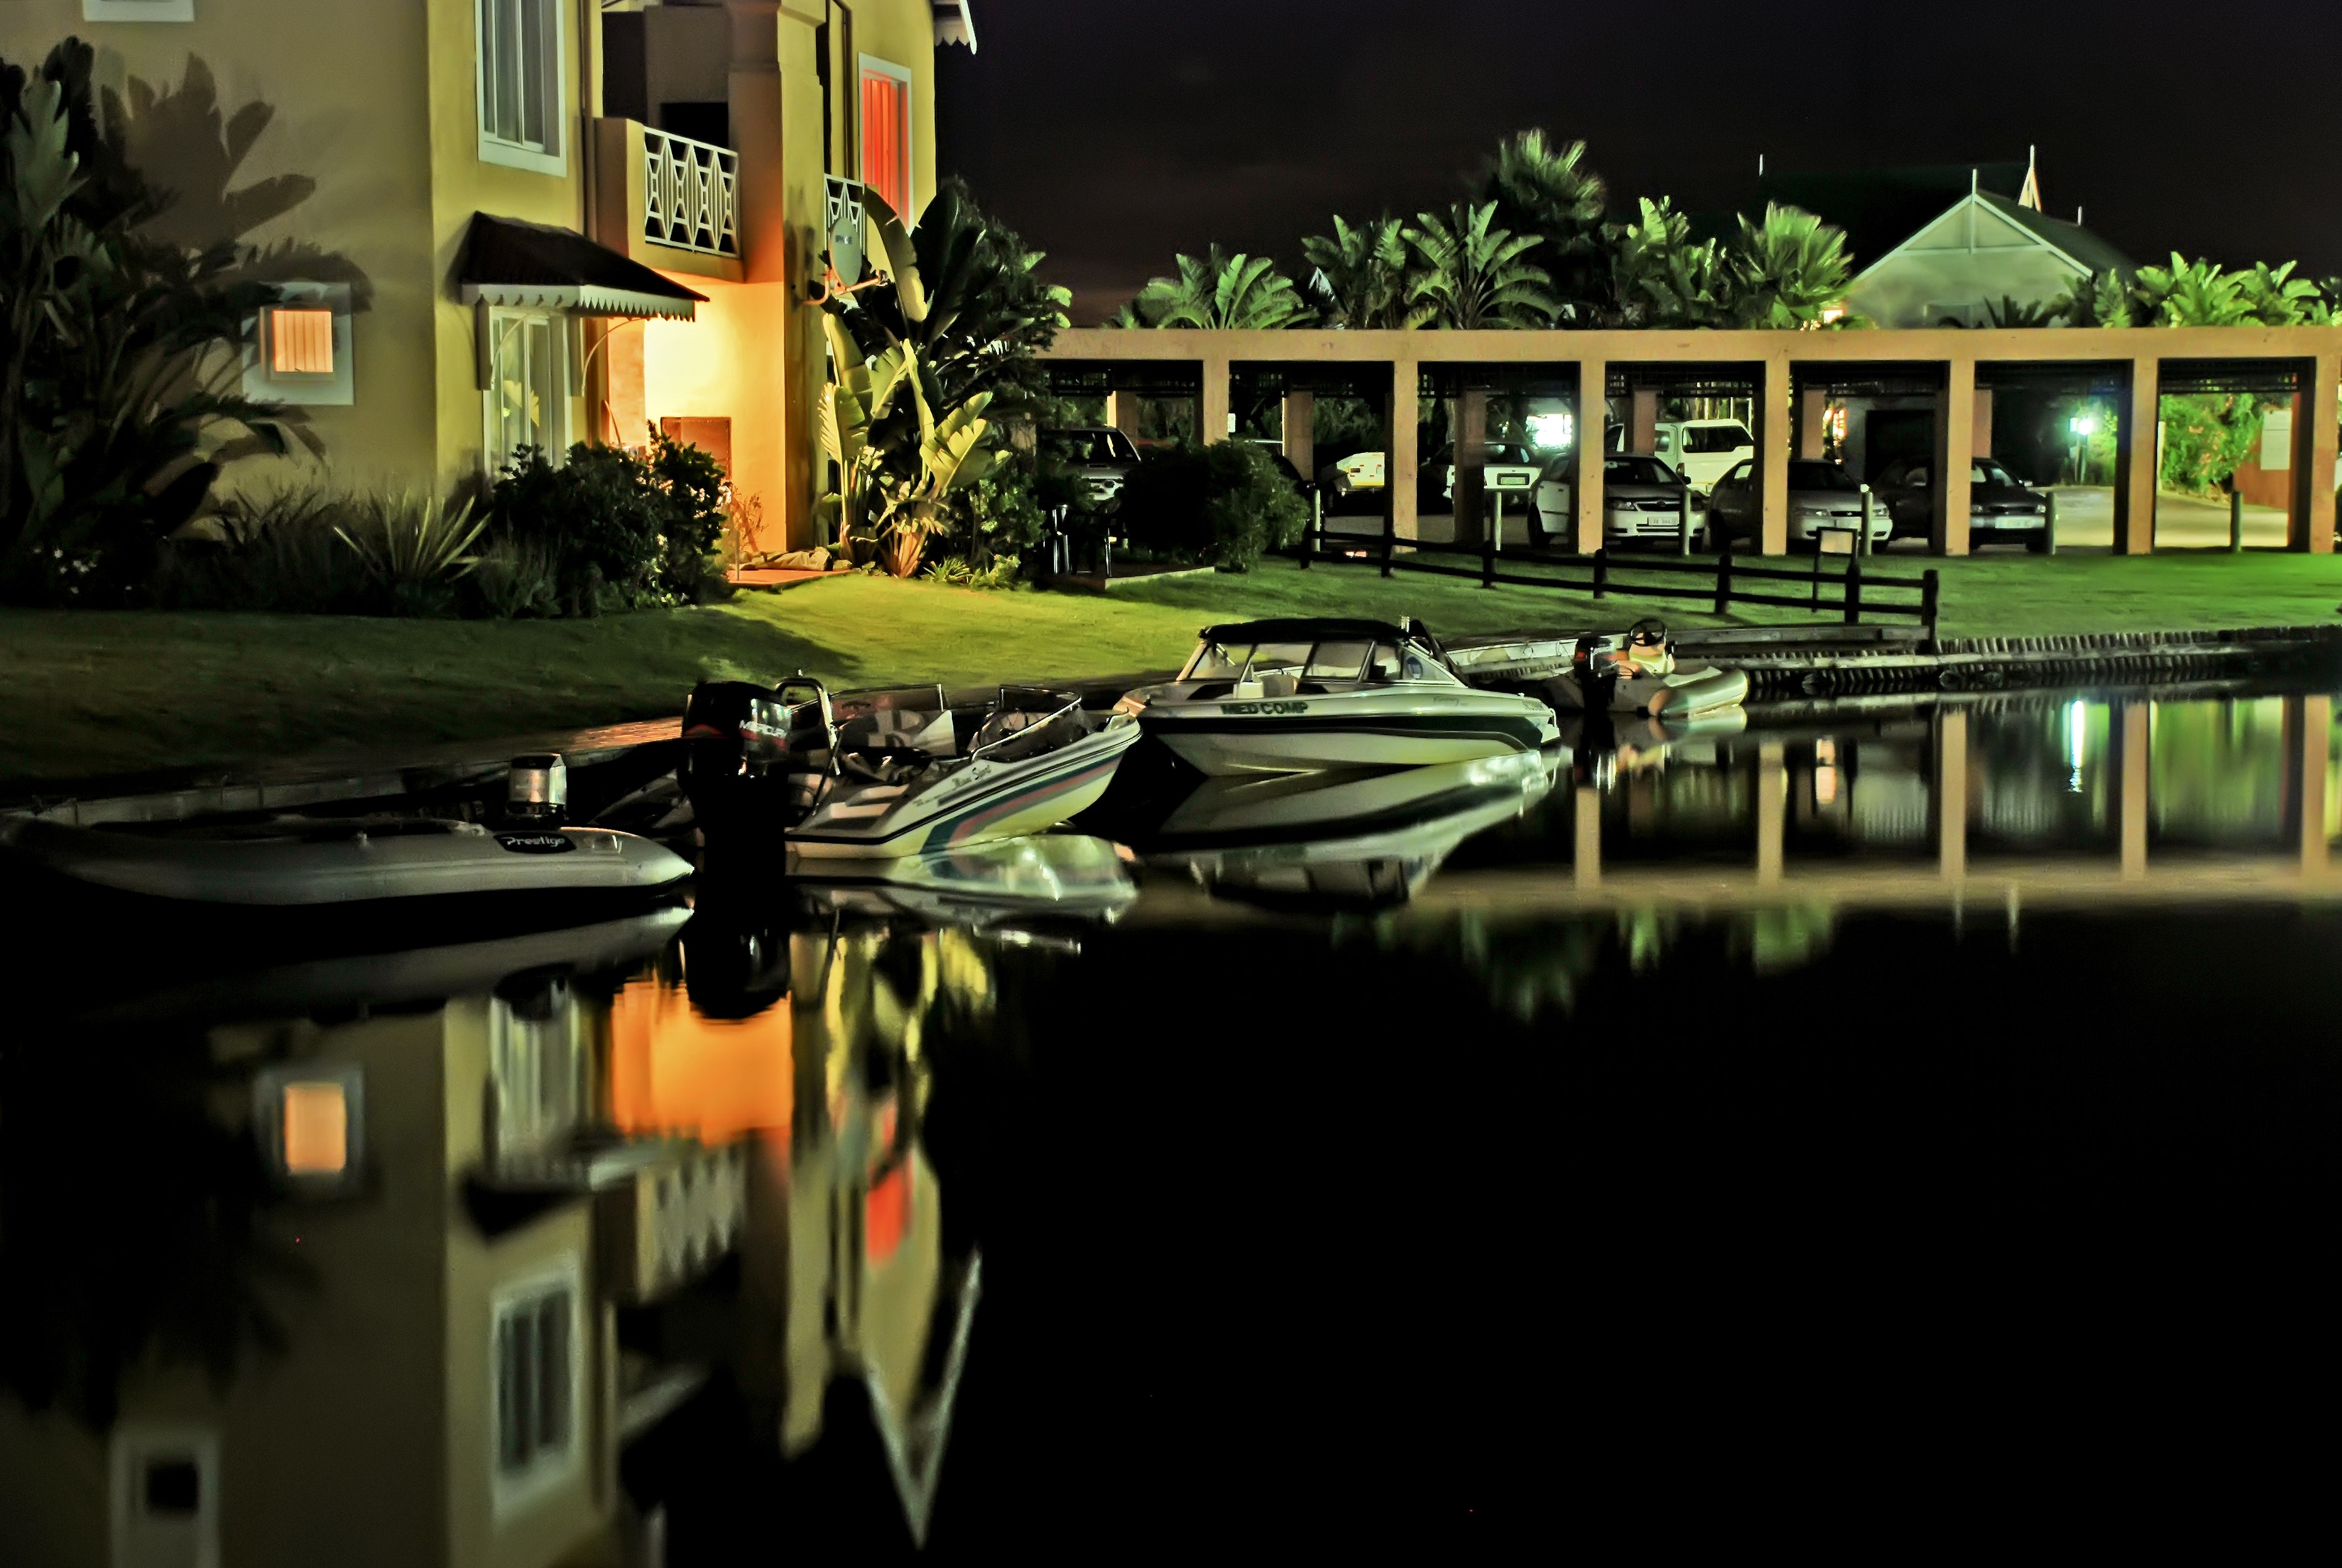 Speed Boats Docked Near House, Architectural design, Light, Water, Vacation, HQ Photo